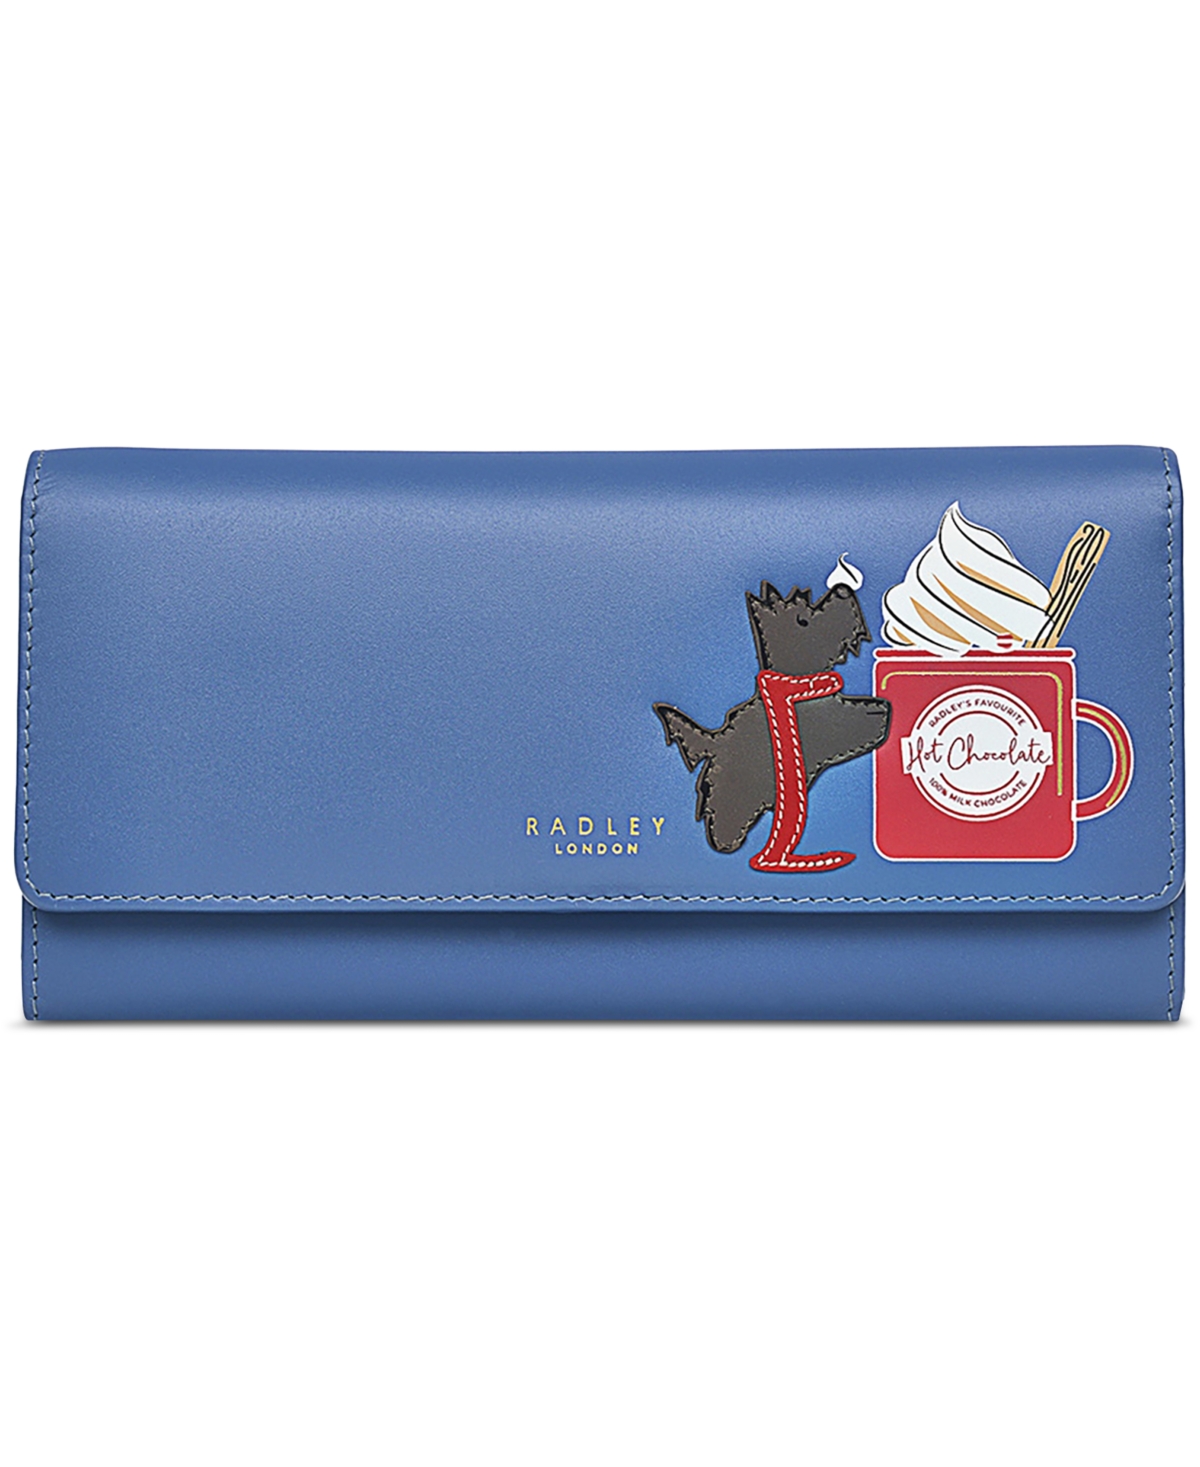 Radley Hot Chocolate Large Leather Flapover Wallet - Storm